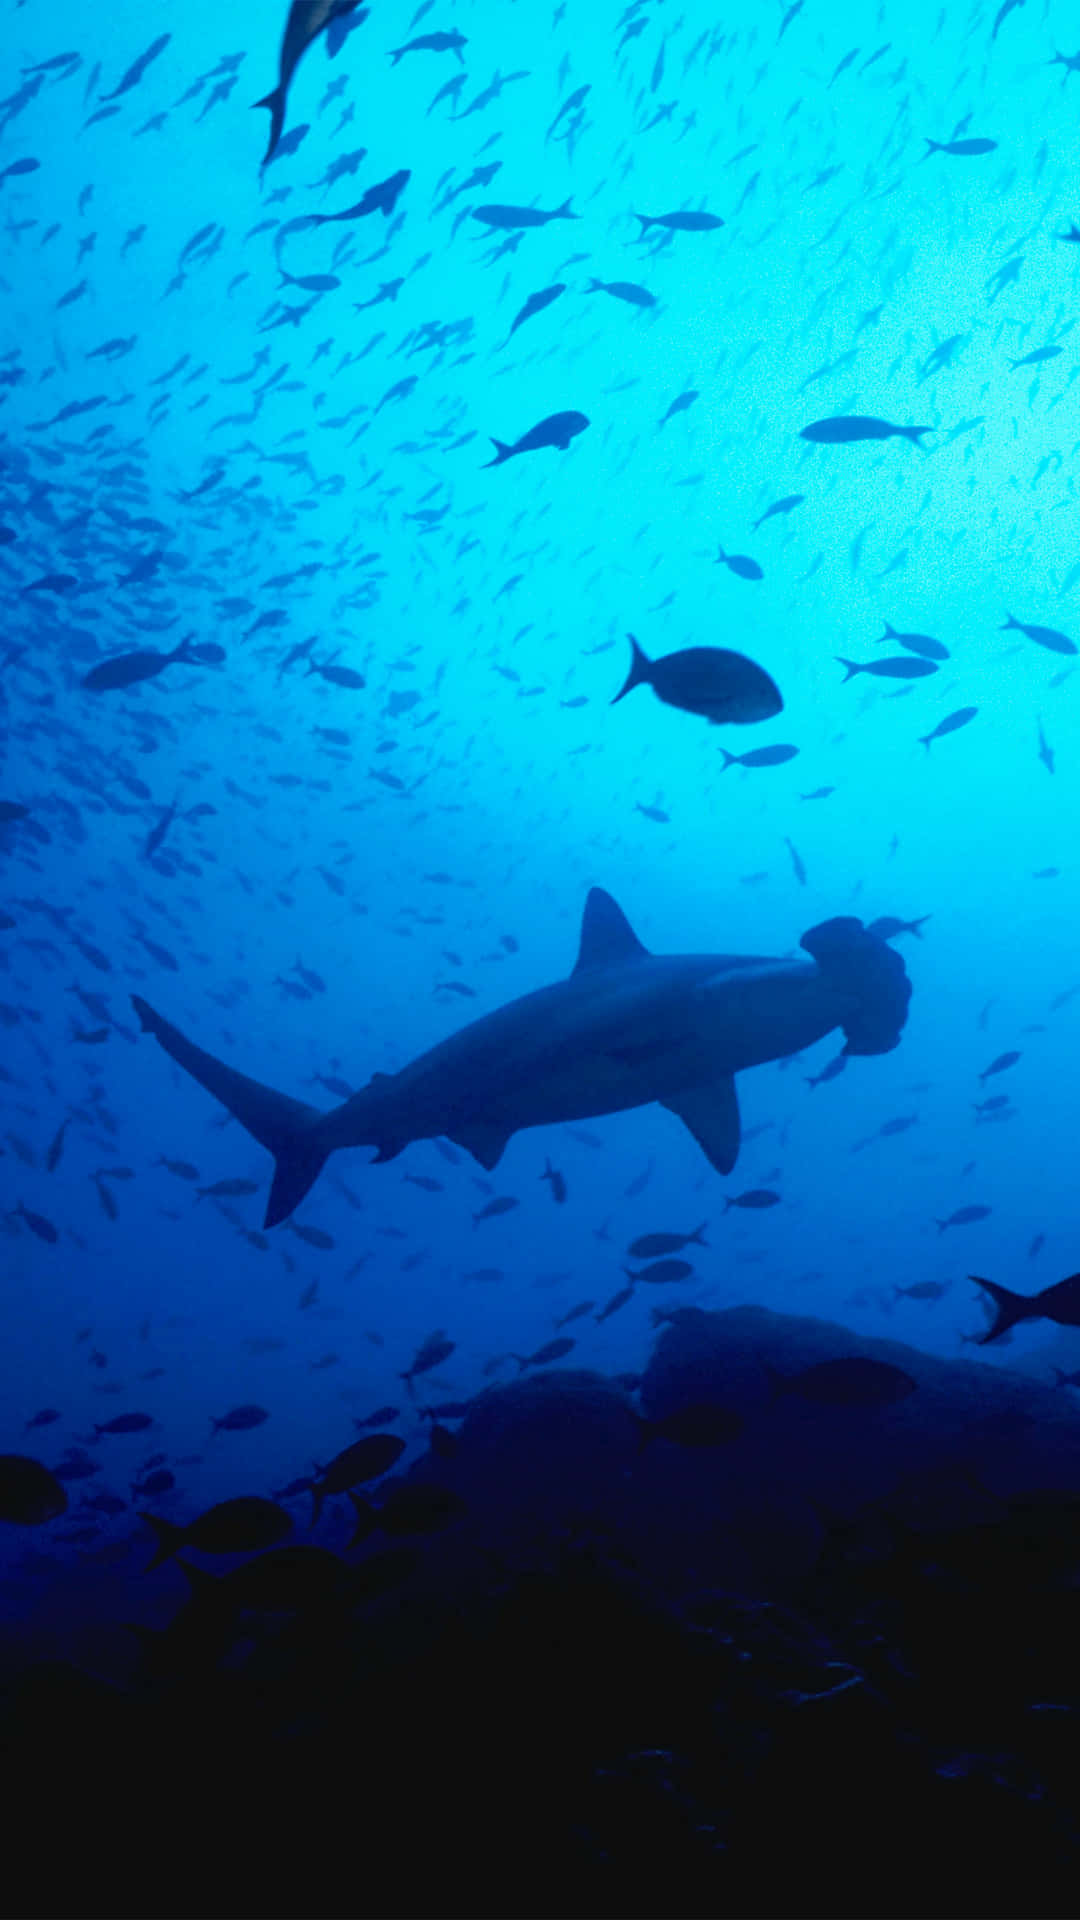 Uncover the hidden treasures of the ocean with the Shark Iphone Wallpaper